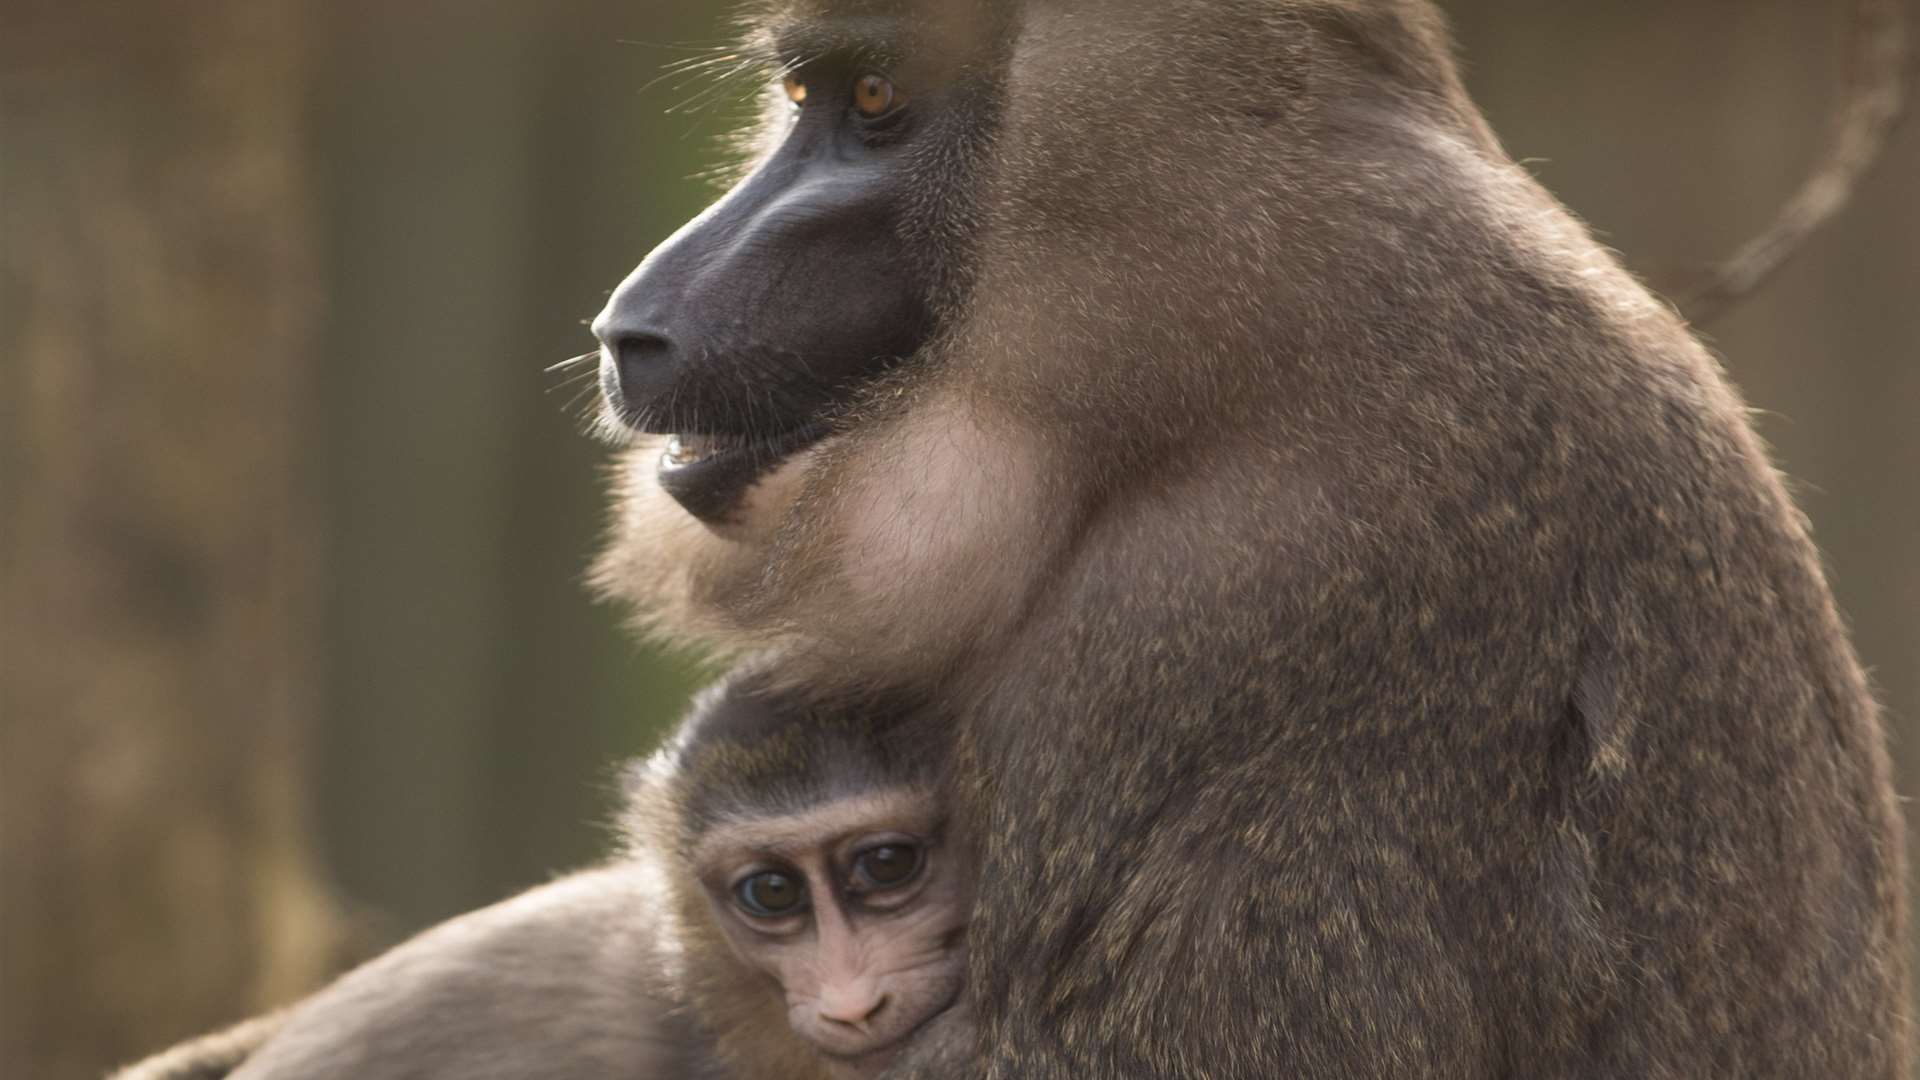 The new baby drill monkey with his mother at Port Lympne Reserve.